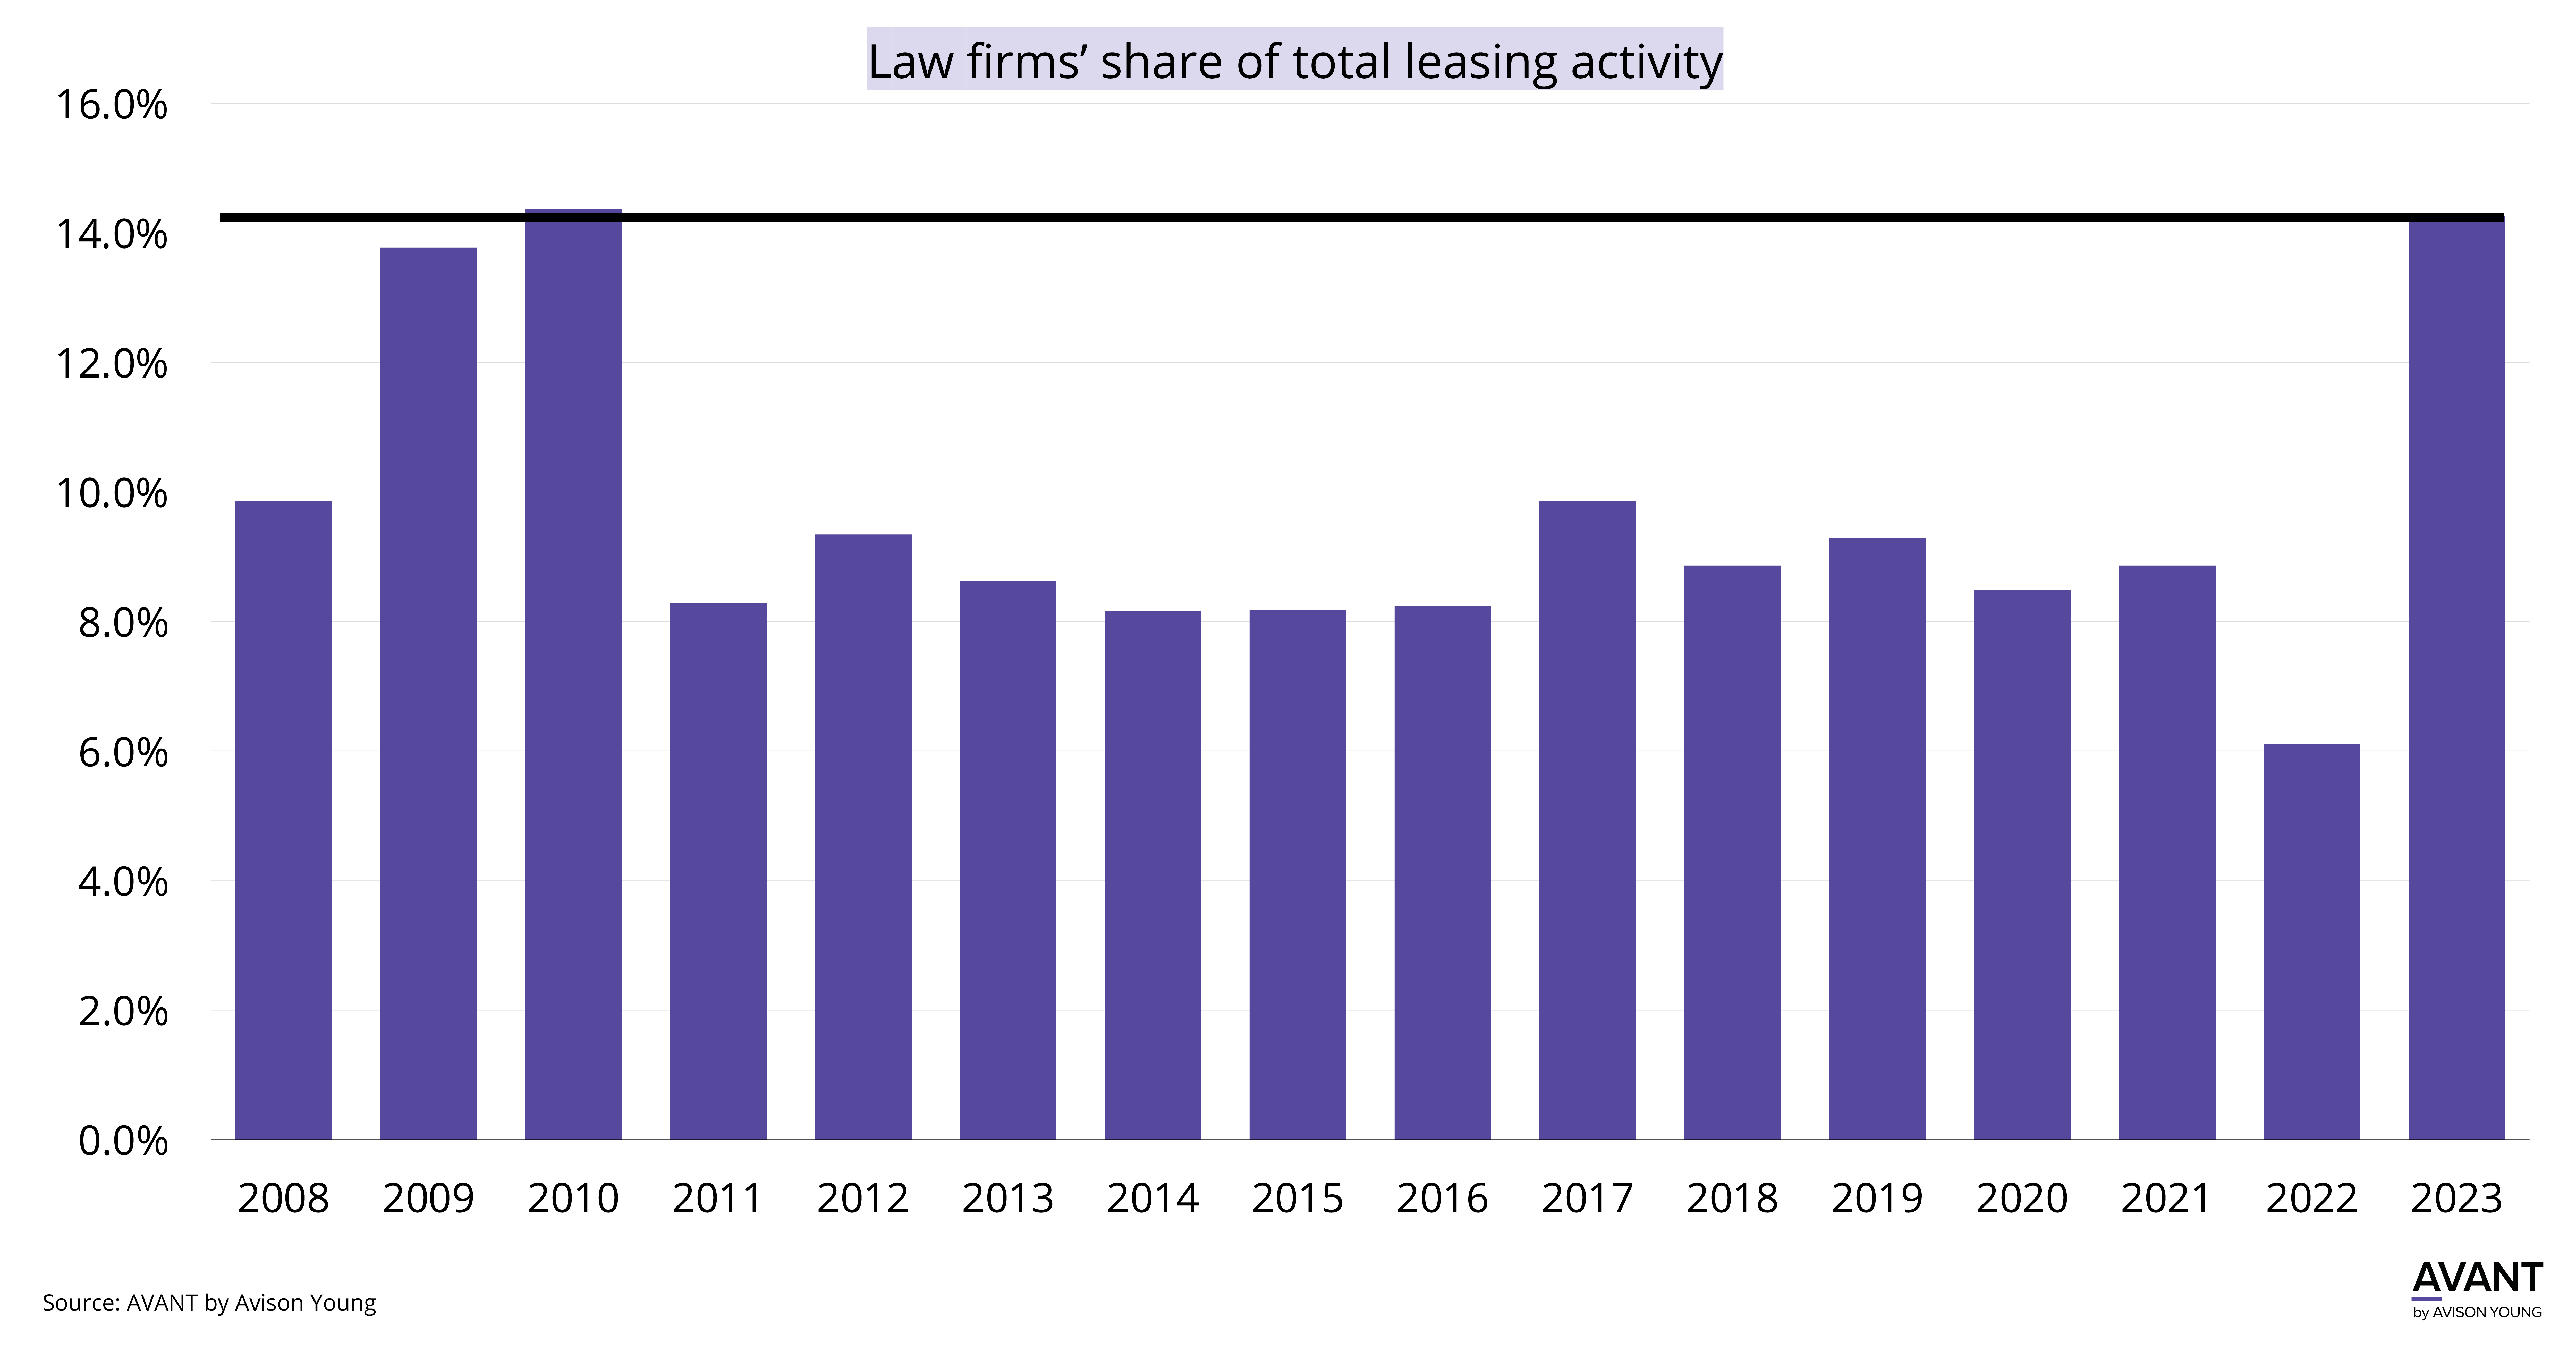 Manhattan Law firms’ share of leasing activity approaching 2010 levels